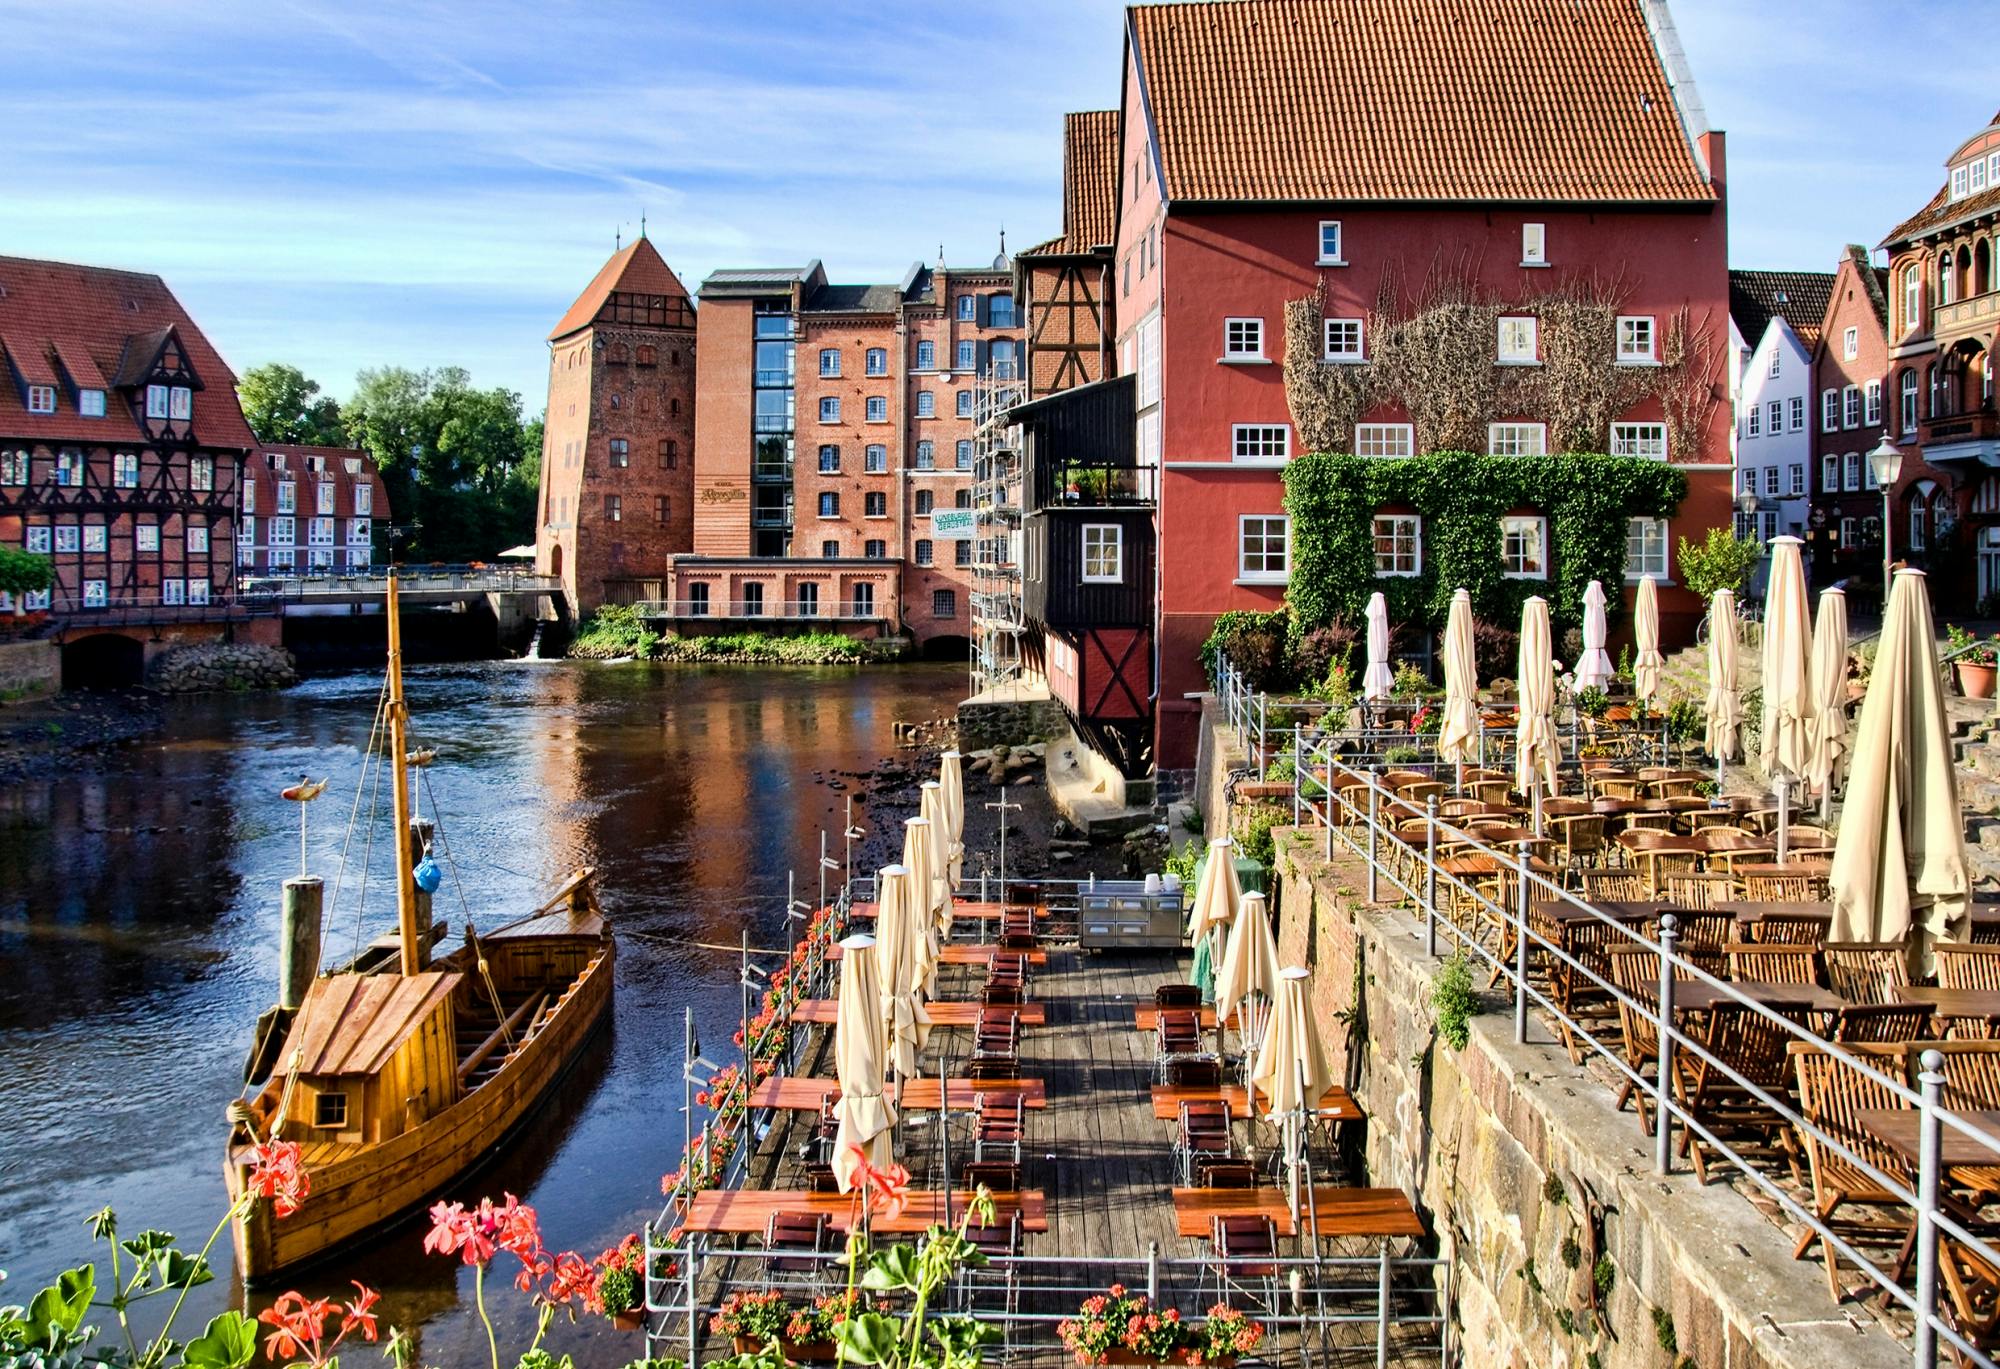 Hamburg Old Town highlights private walking tour